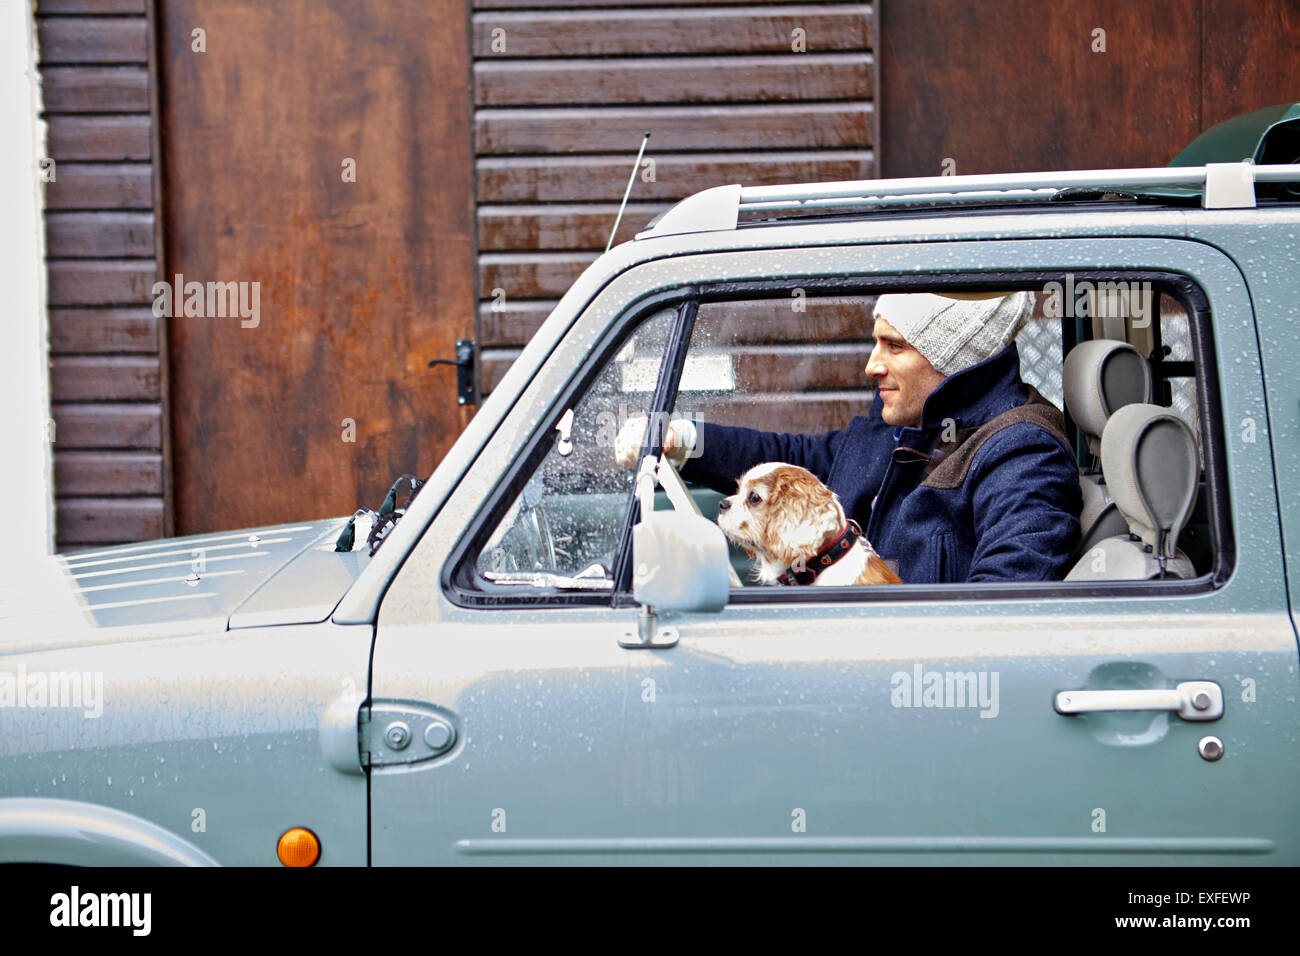 Mid adult man with dog driving van Banque D'Images